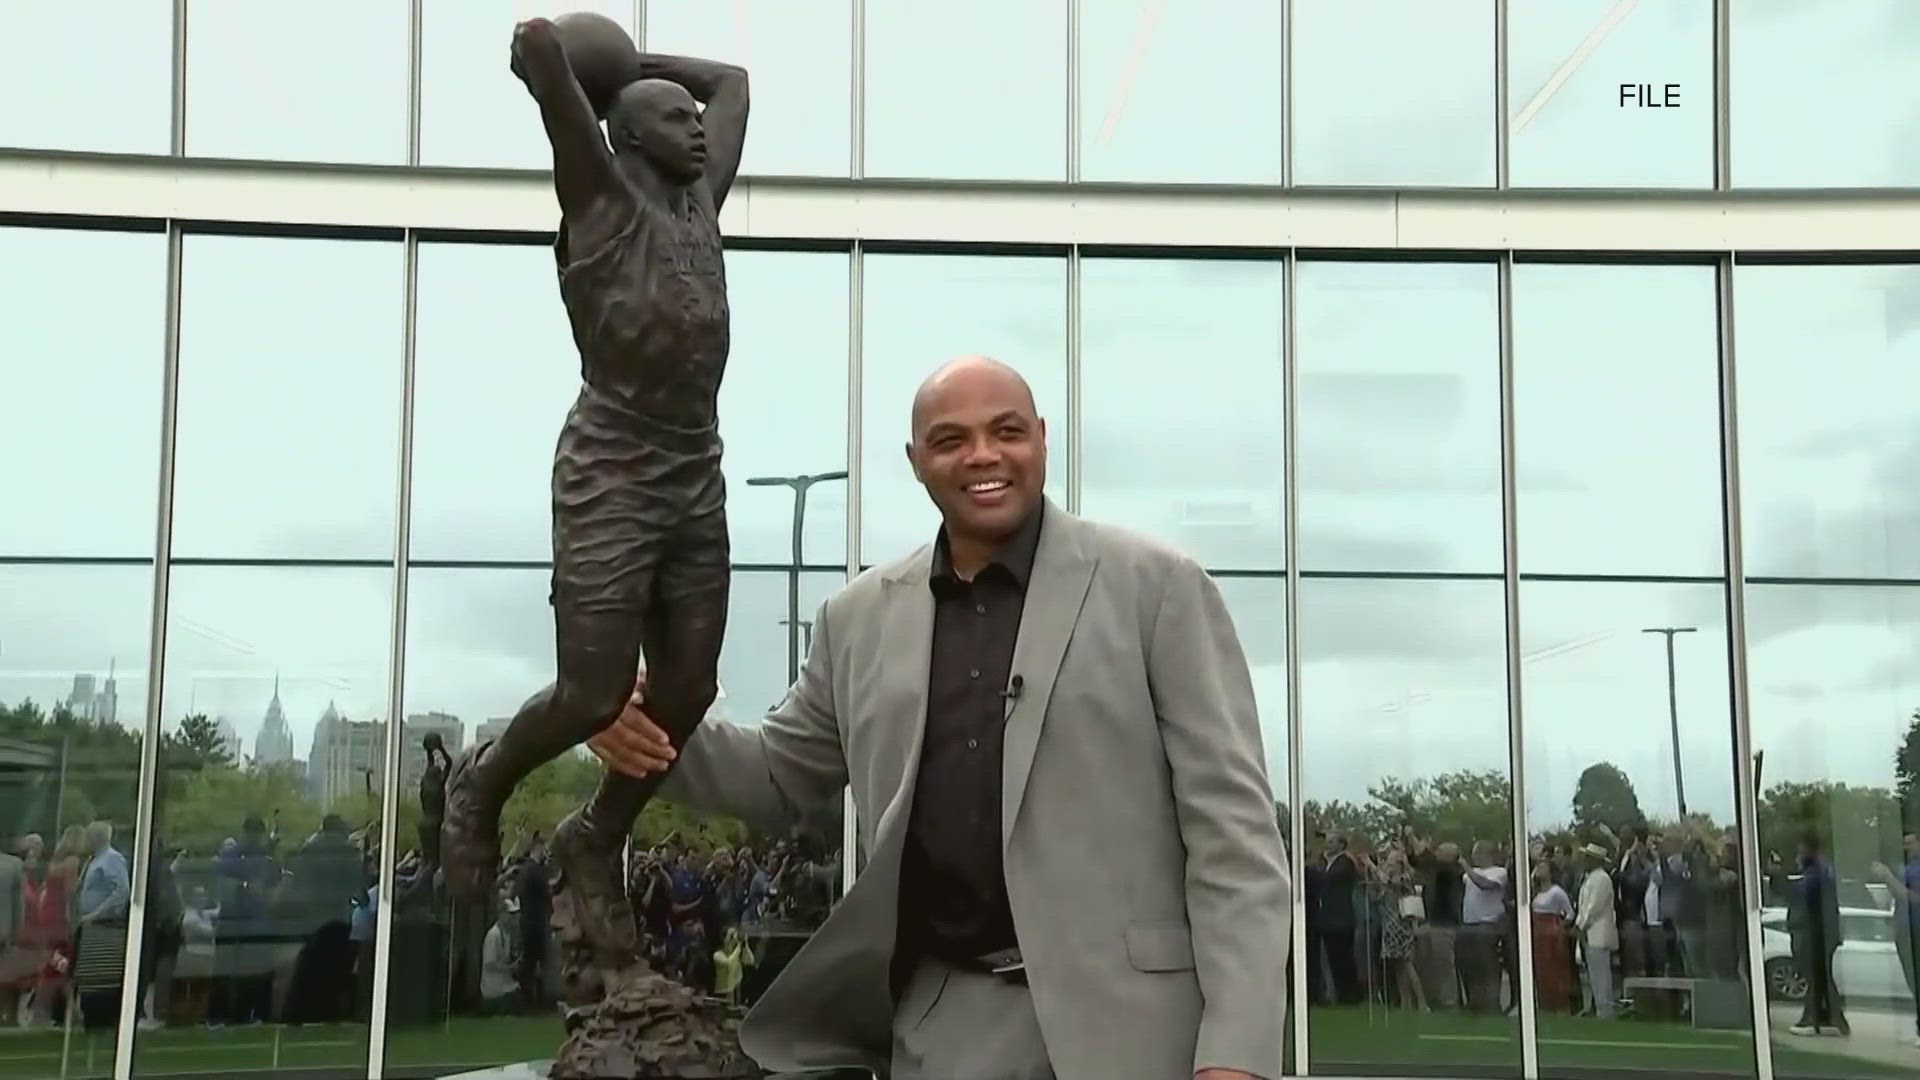 NBA Hall-of-Famer Charles Barkley plans to give St. Mary's Academy in New Orleans East a generous donation. According to reports, Barkley promised $1 million.